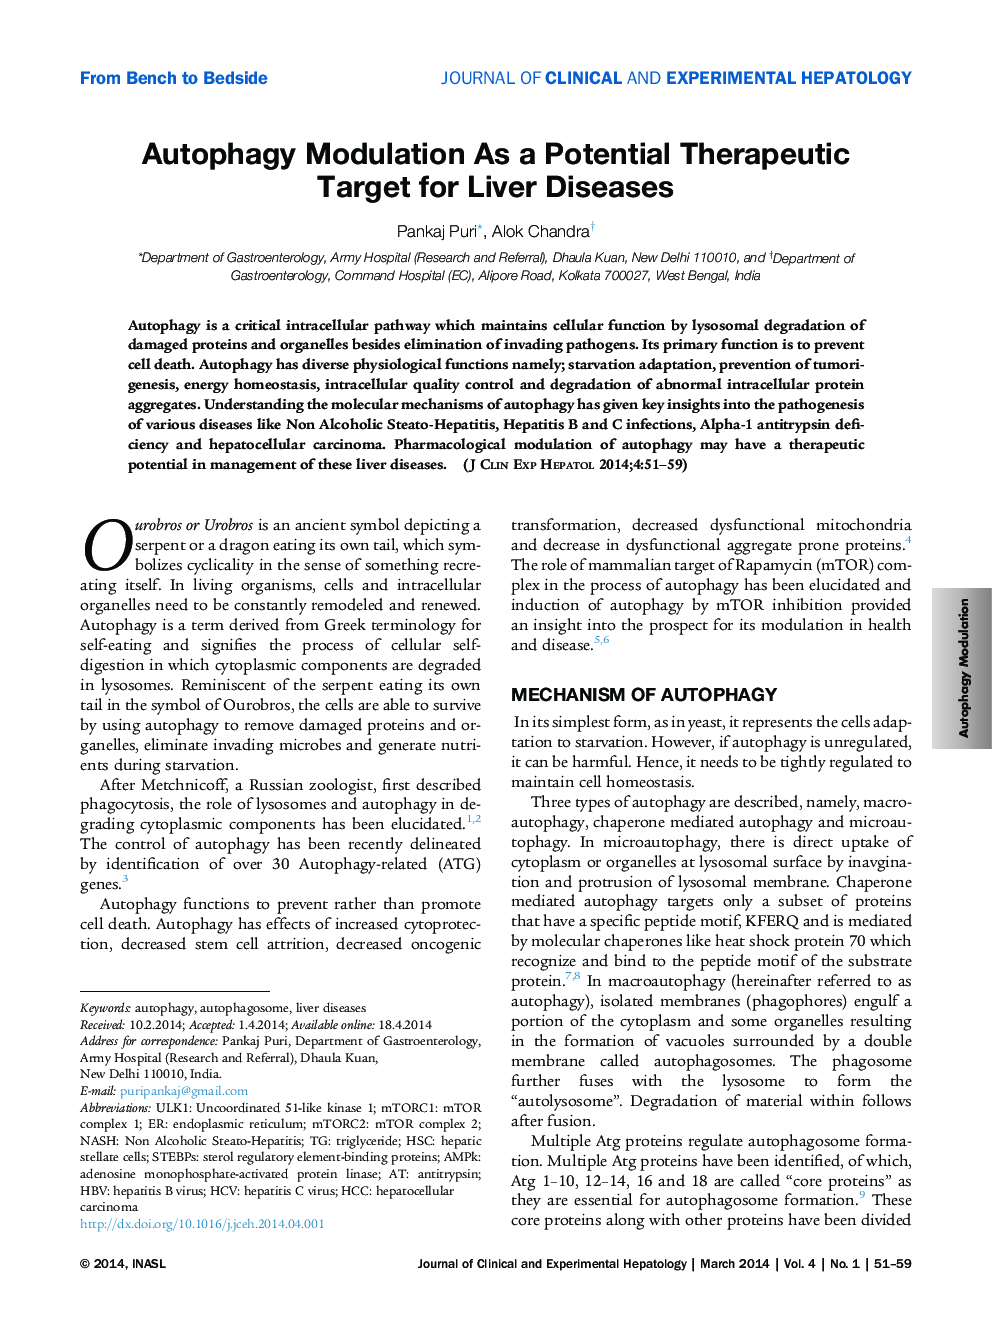 Autophagy Modulation As a Potential Therapeutic Target for Liver Diseases